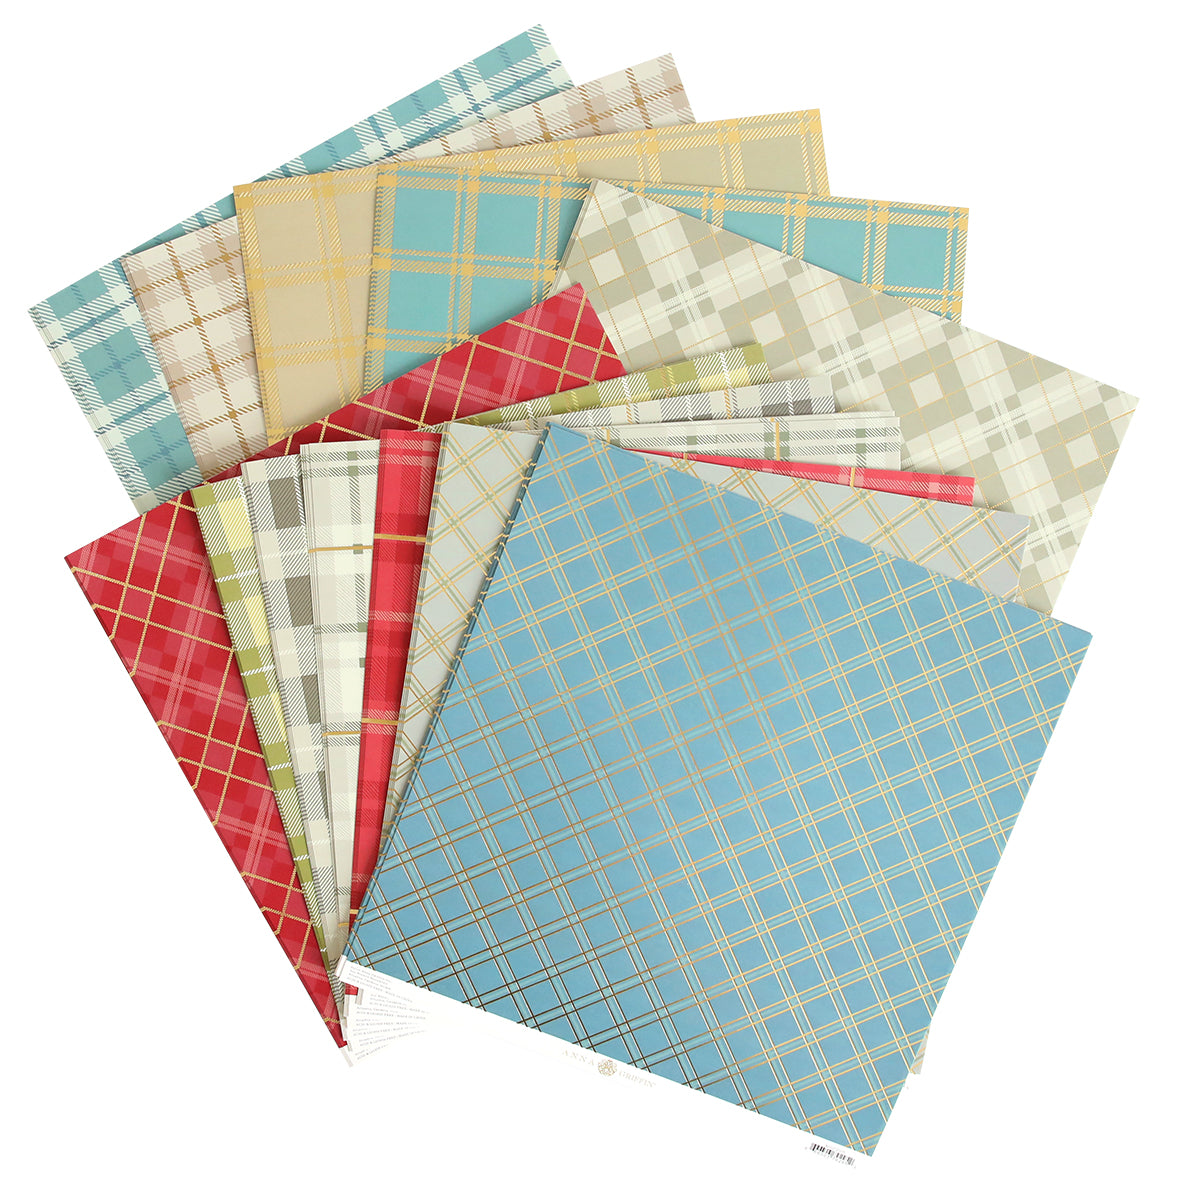 A bunch of Fall Plaid 12x12 Cardstock papers, resembling a plaid flannel pattern, on a white background from Anna Griffin.